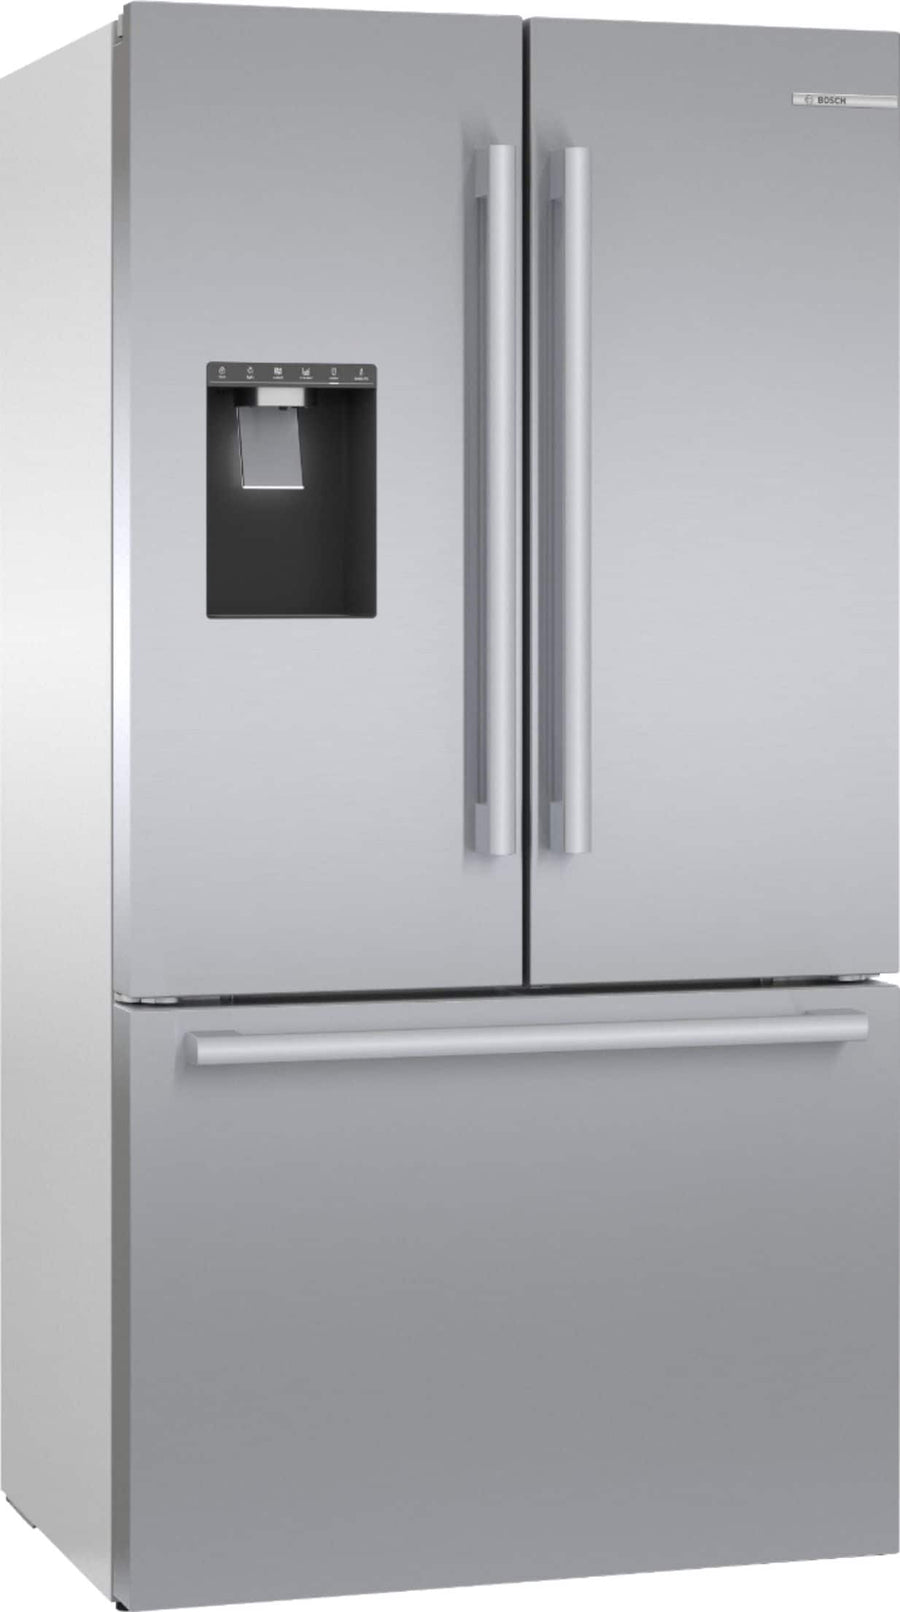 Bosch - 500 Series 21 Cu. Ft. French Door Counter-Depth Smart Refrigerator with External Water and Ice Maker - Stainless steel_0